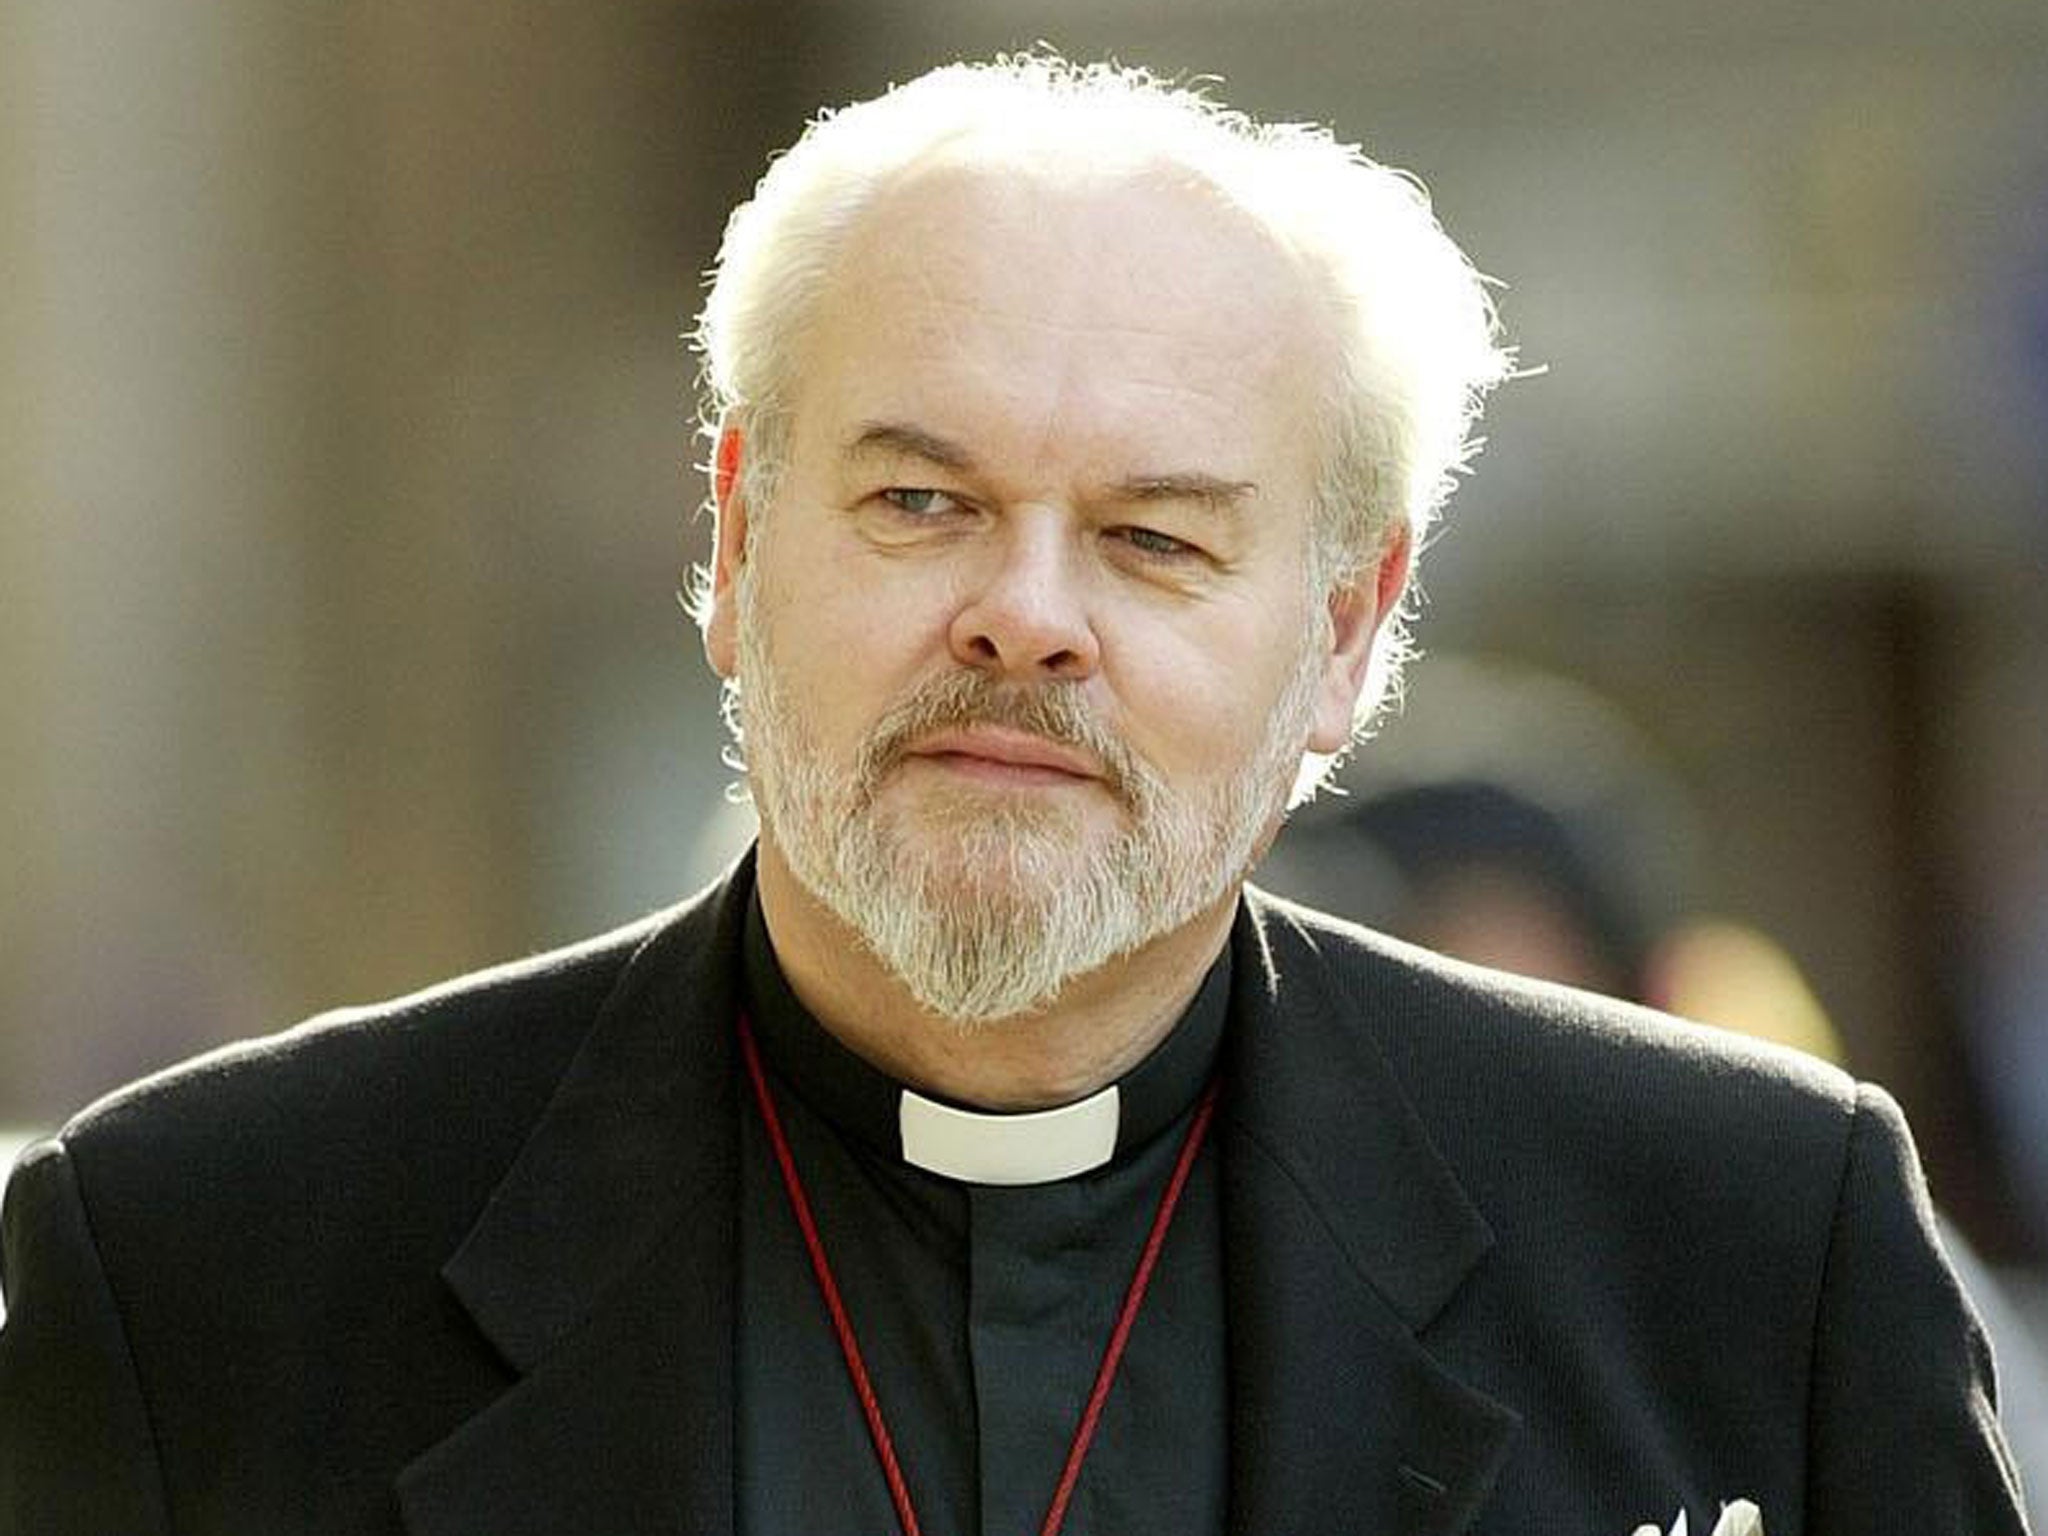 The Bishop of London, the Right Reverend Richard Chartres, is known for his outspoken views